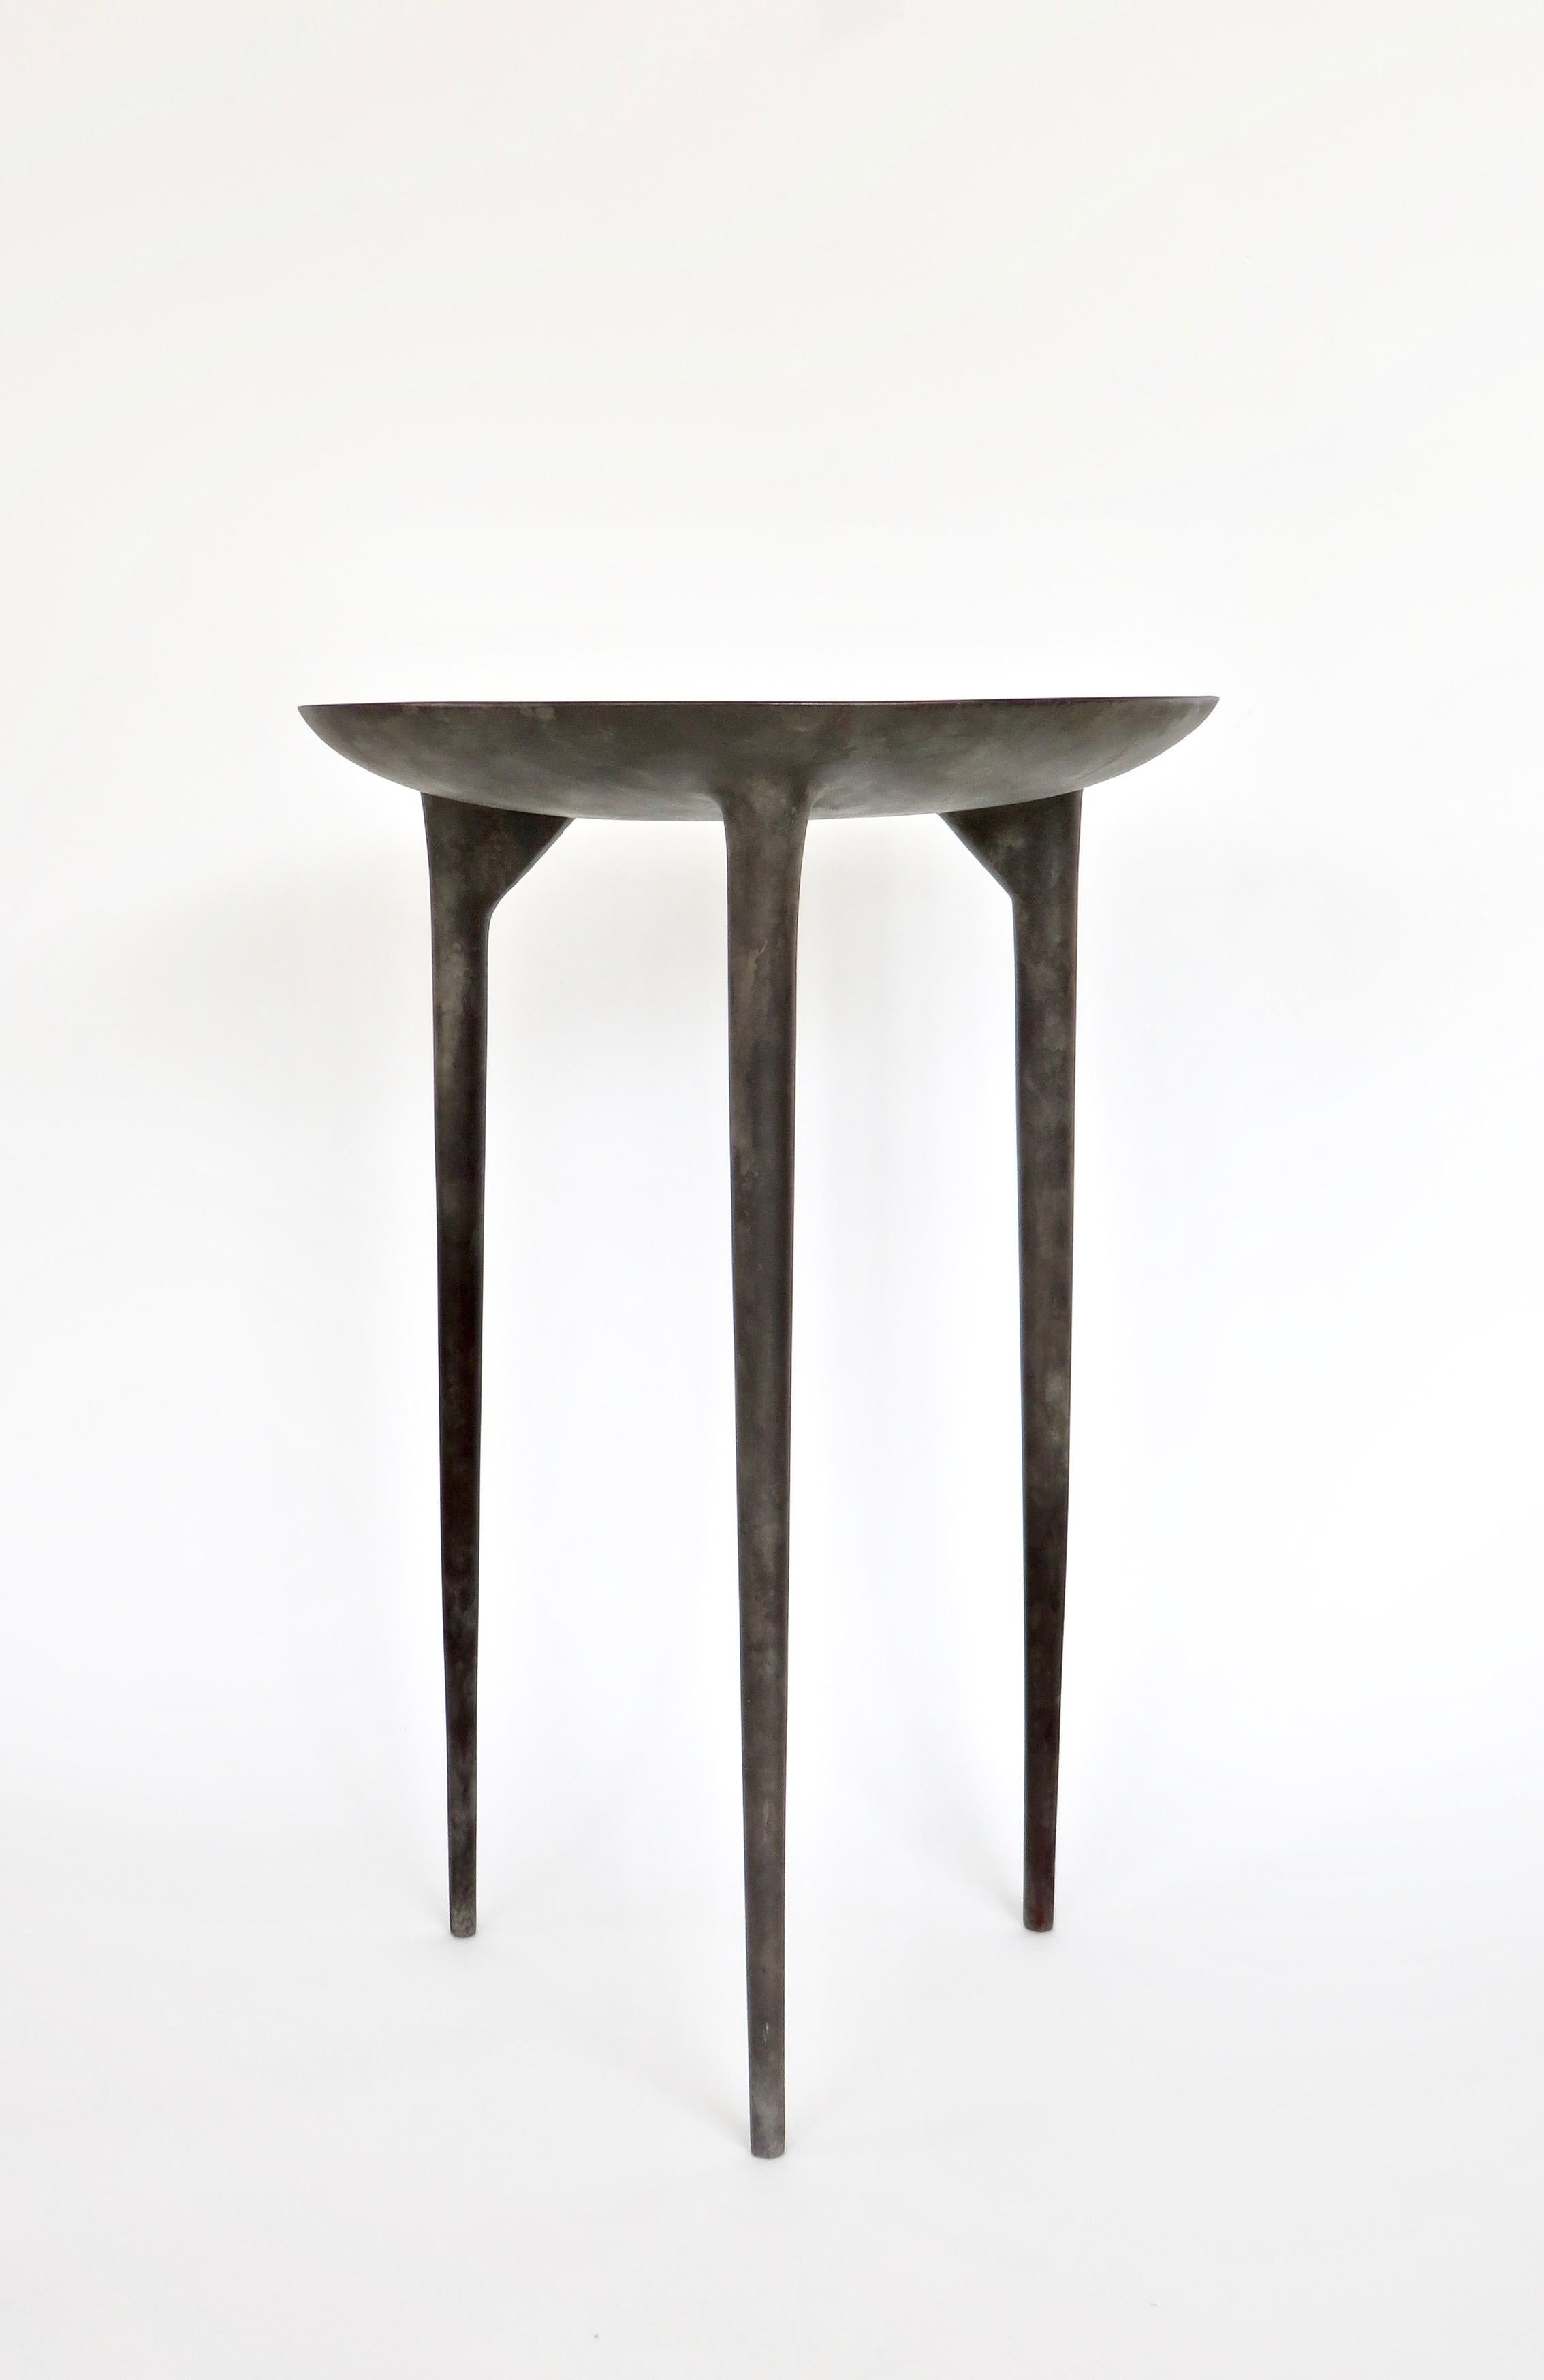 Handmade tall three-legged bronze brazier side table from the Rick Owens home collection. 'Tall Brazier' three-legged table in solid bronze with nitrate finish shown.
Signed Rick Owens. Each table is a piece unique with hand applied patina. 
Each